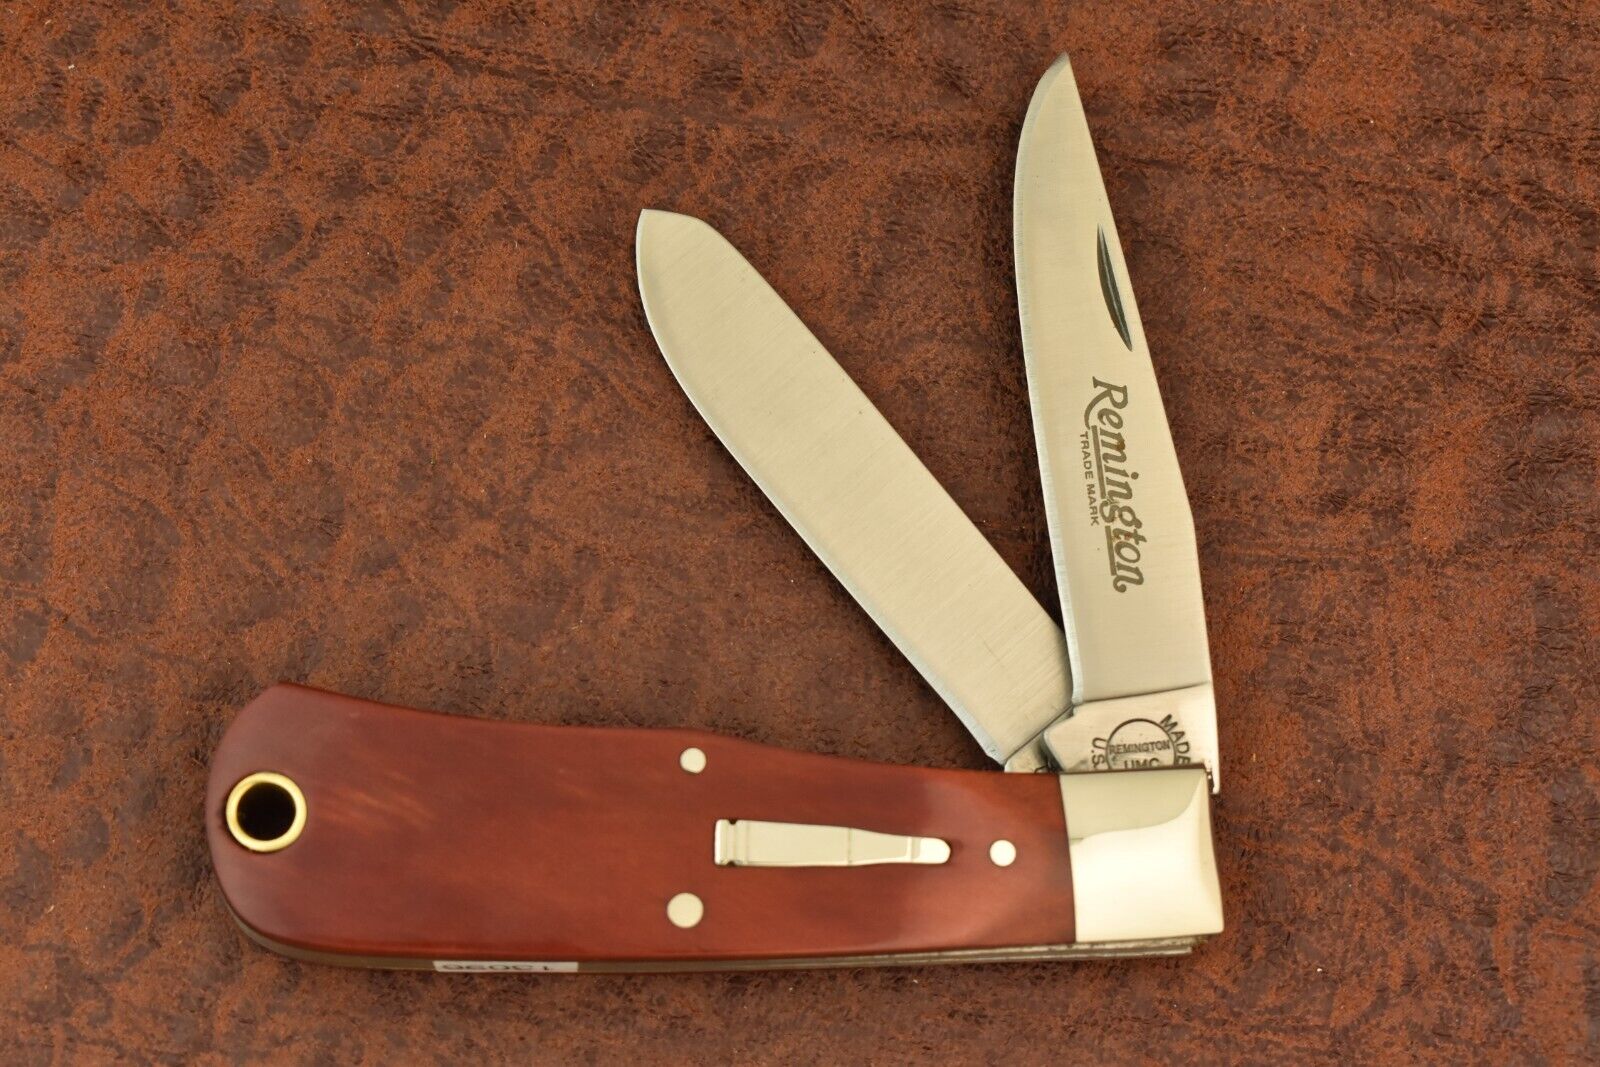 REMINGTON MADE IN USA SMOOTH WOOD BABY BULLET TRAPPER KNIFE 2003 R1178C (13696)